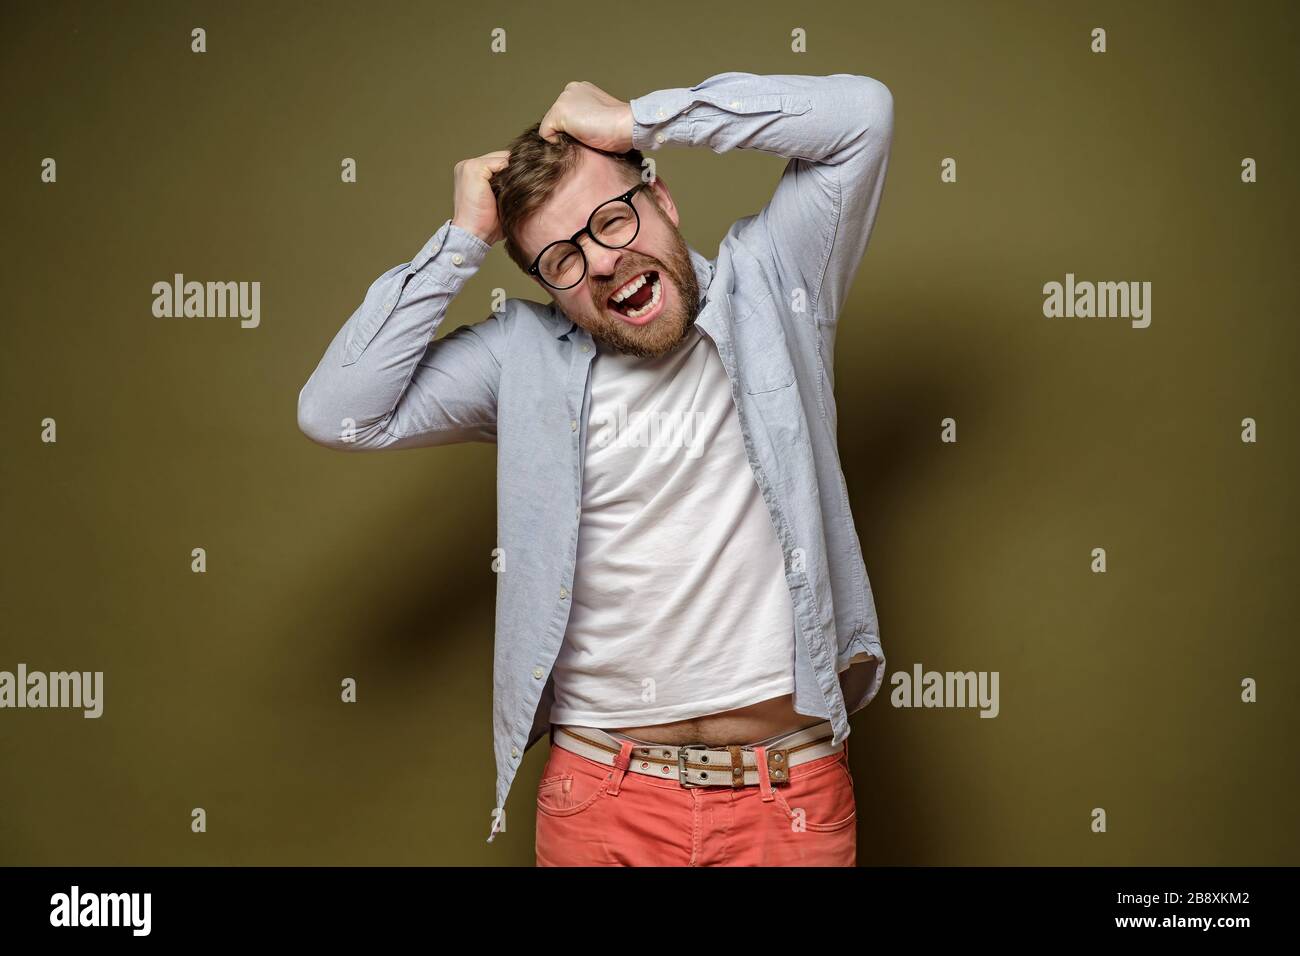 Caucasian man in stress, he is trying to tear his hair out and looks crazy, on a green background. Stock Photo